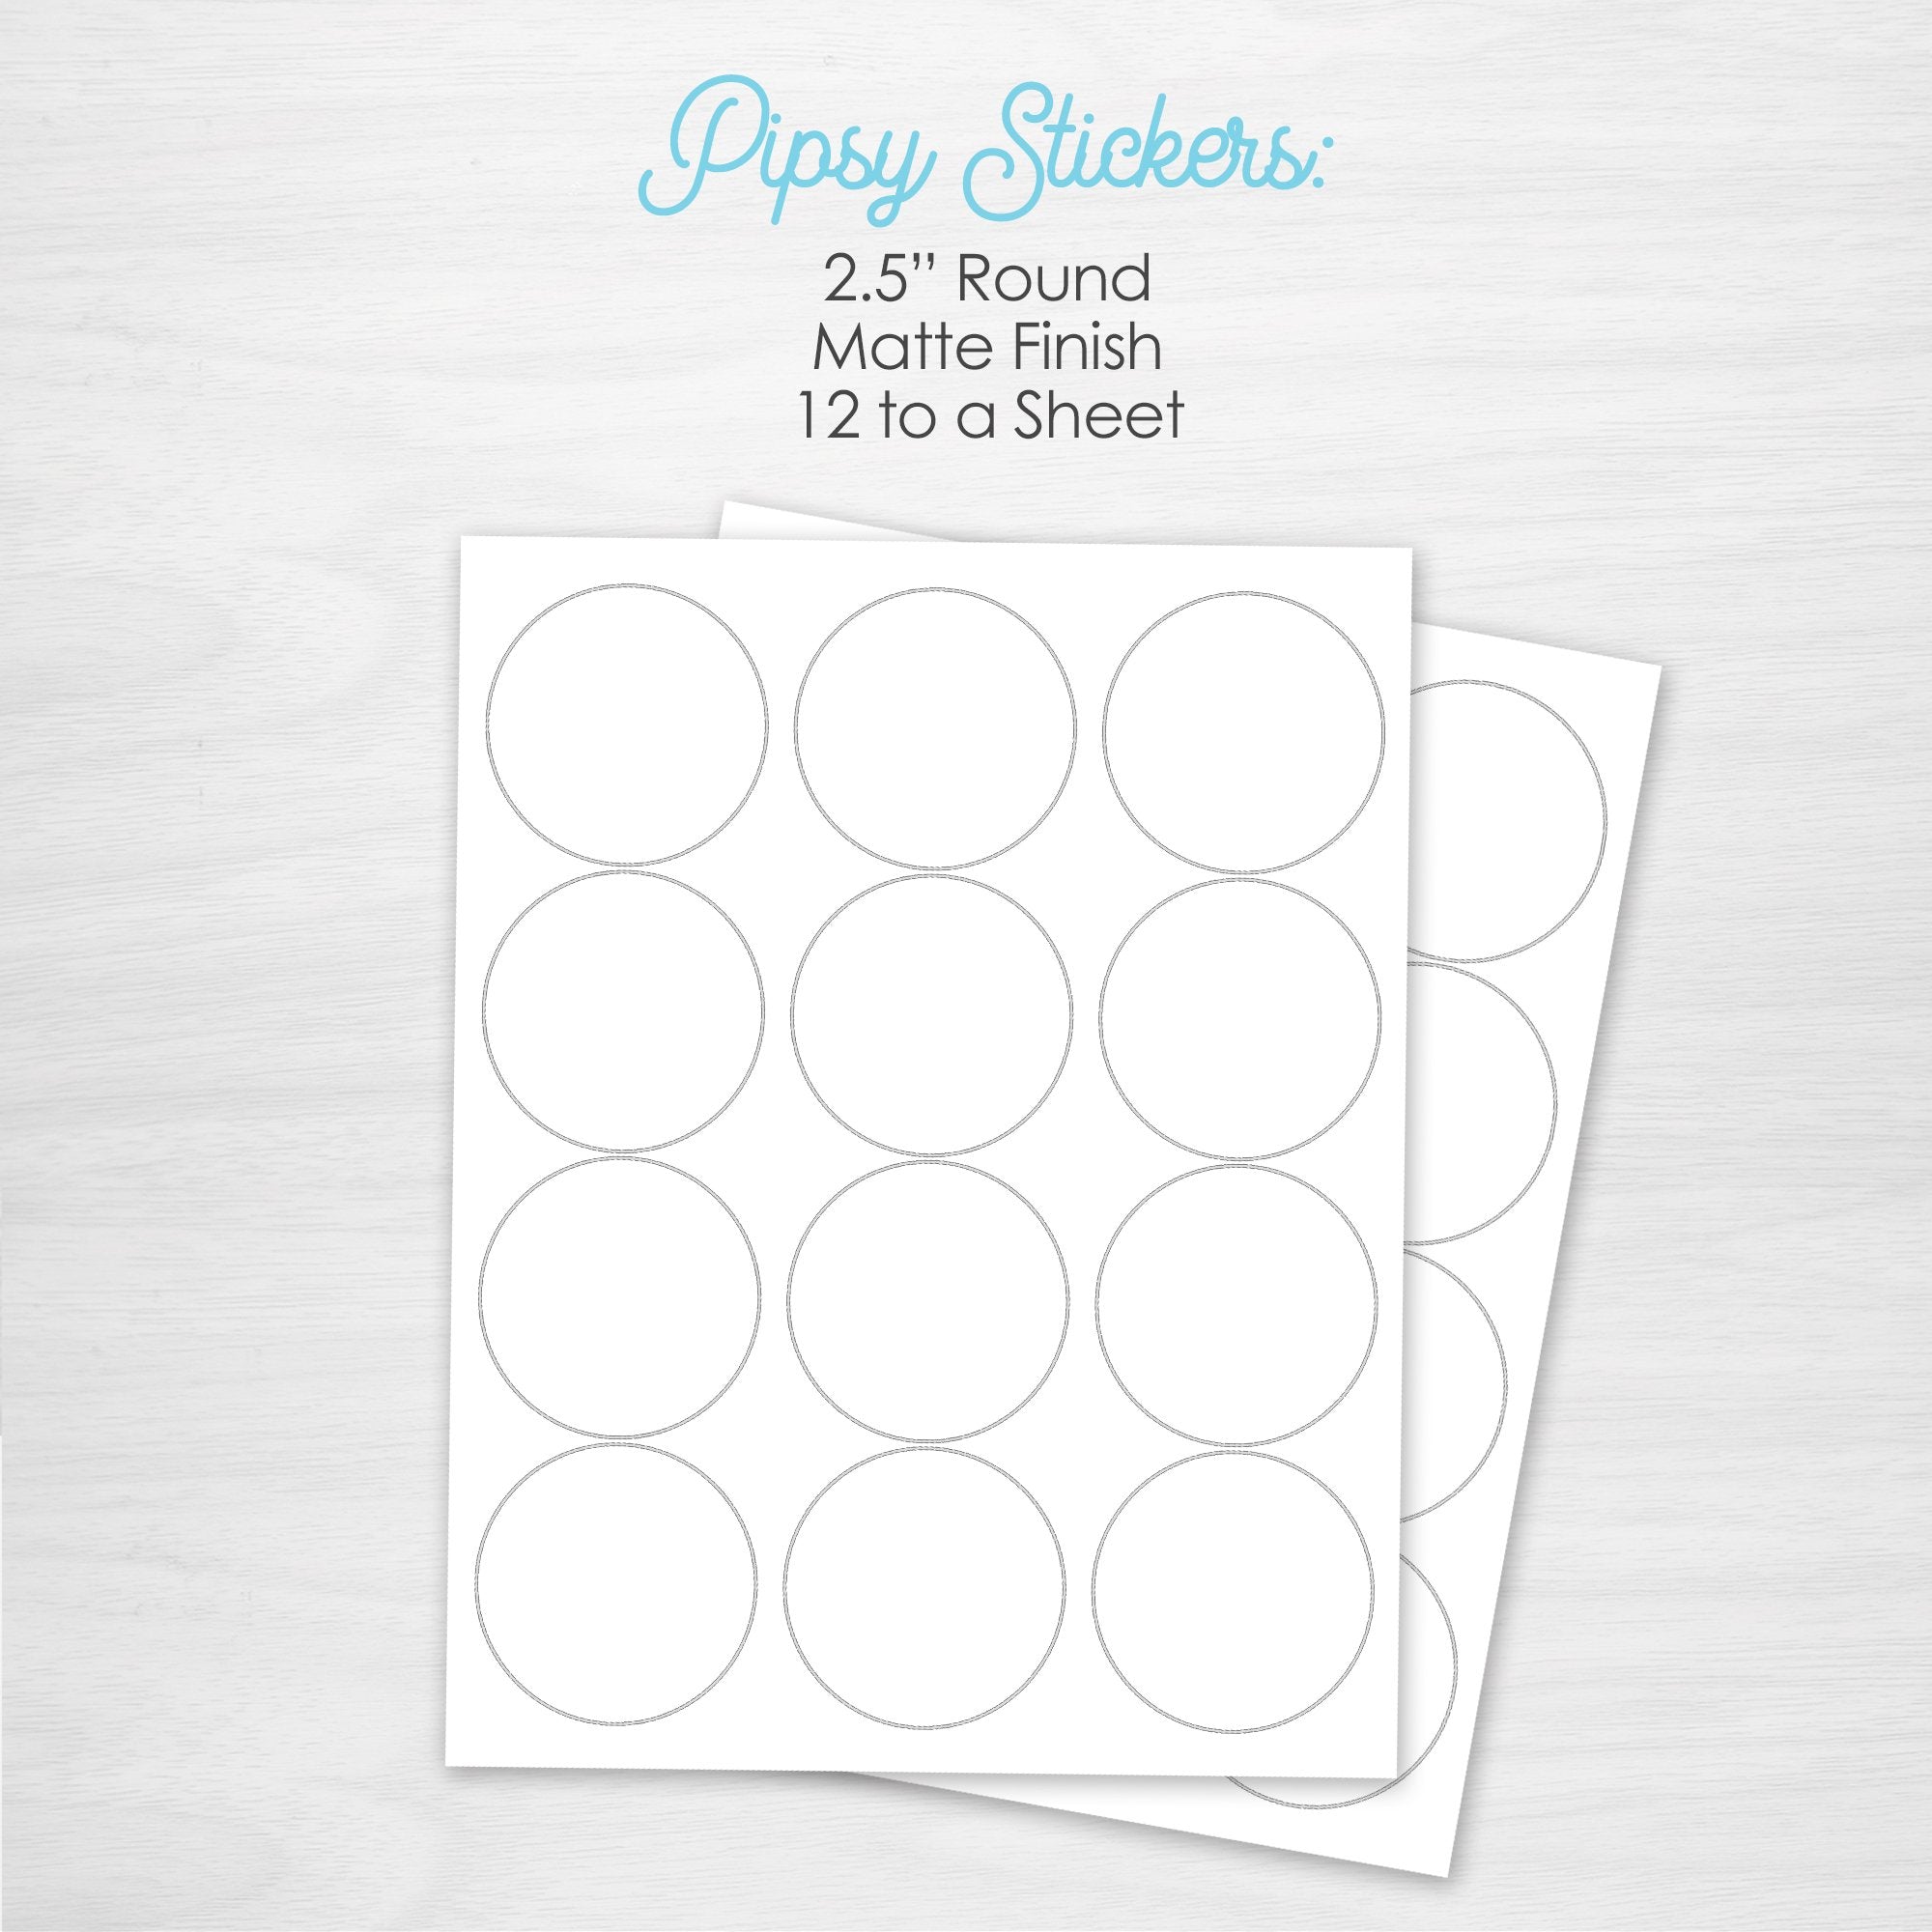 2.5" round matte stickers, 12 to a sheet